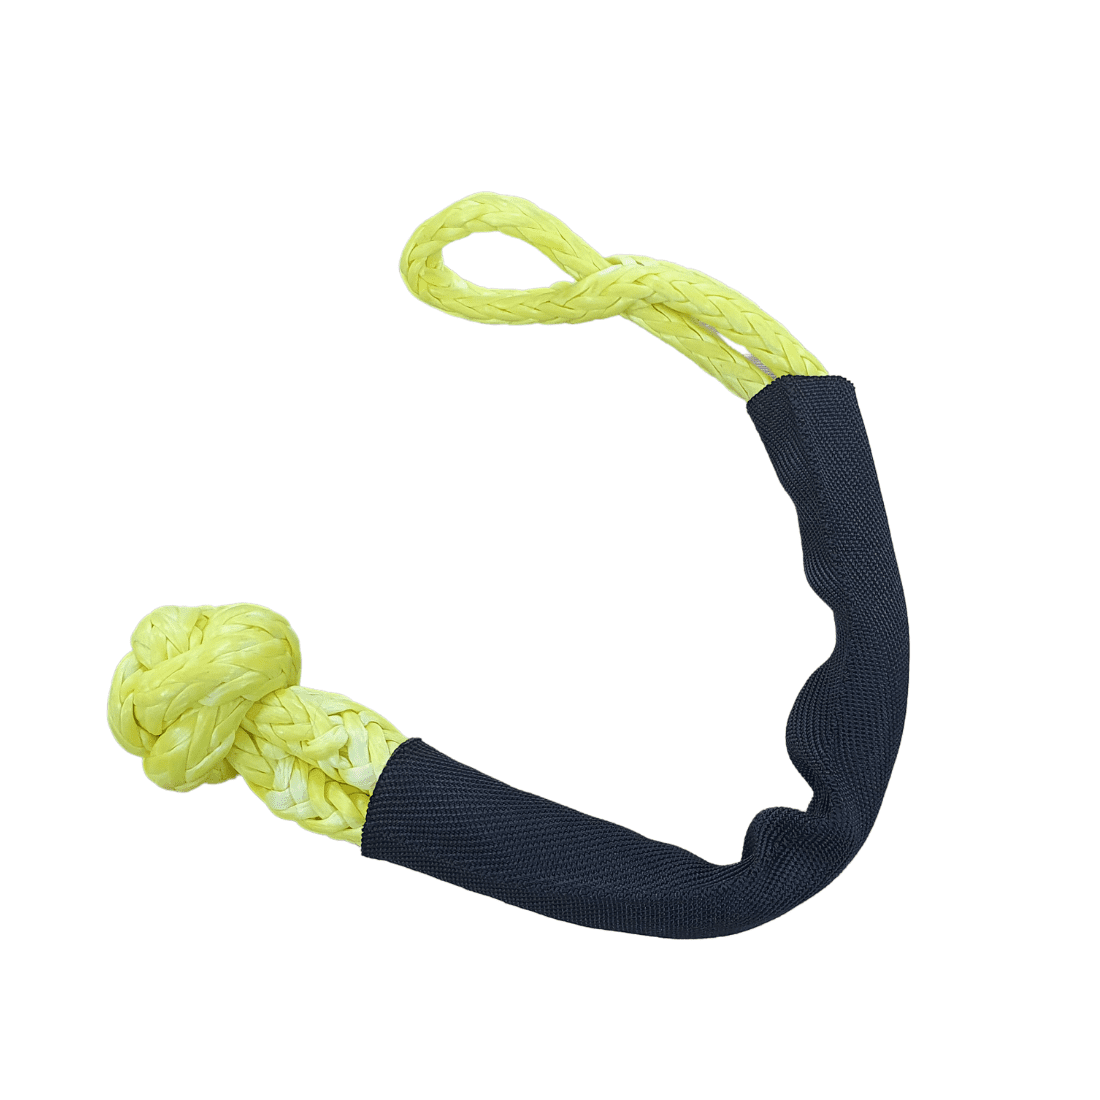 Soft shackle 8mm x 460mm YELLOW UHMWPE with 9384kgs MBL - Damar Webbing Solutions Ltd